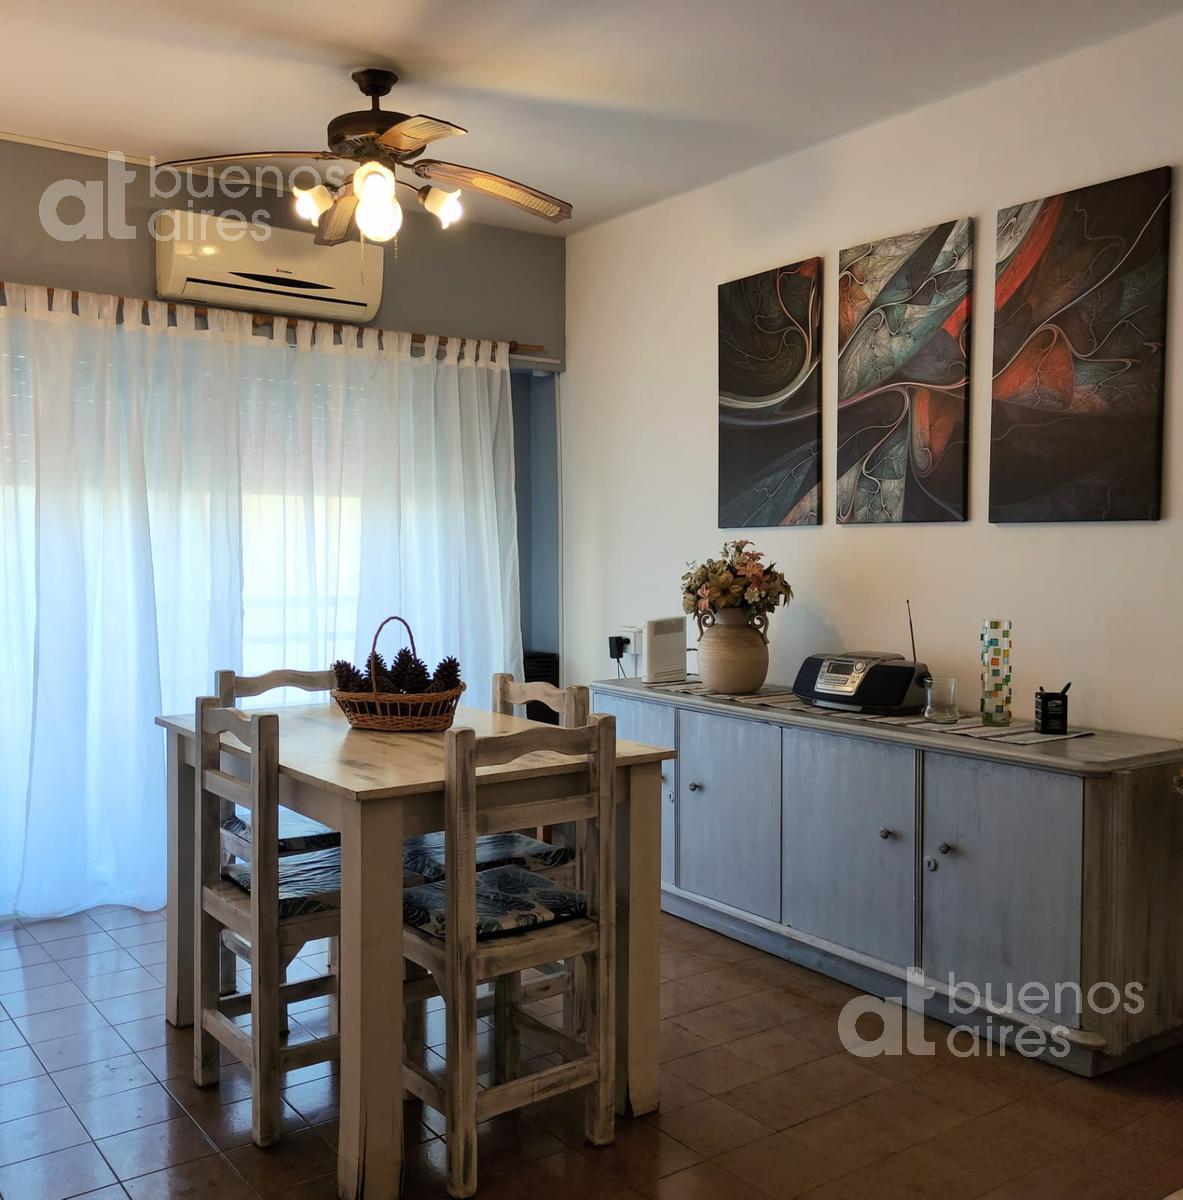 #5028763 | Temporary Rental | Apartment | Flores (At Buenos Aires)